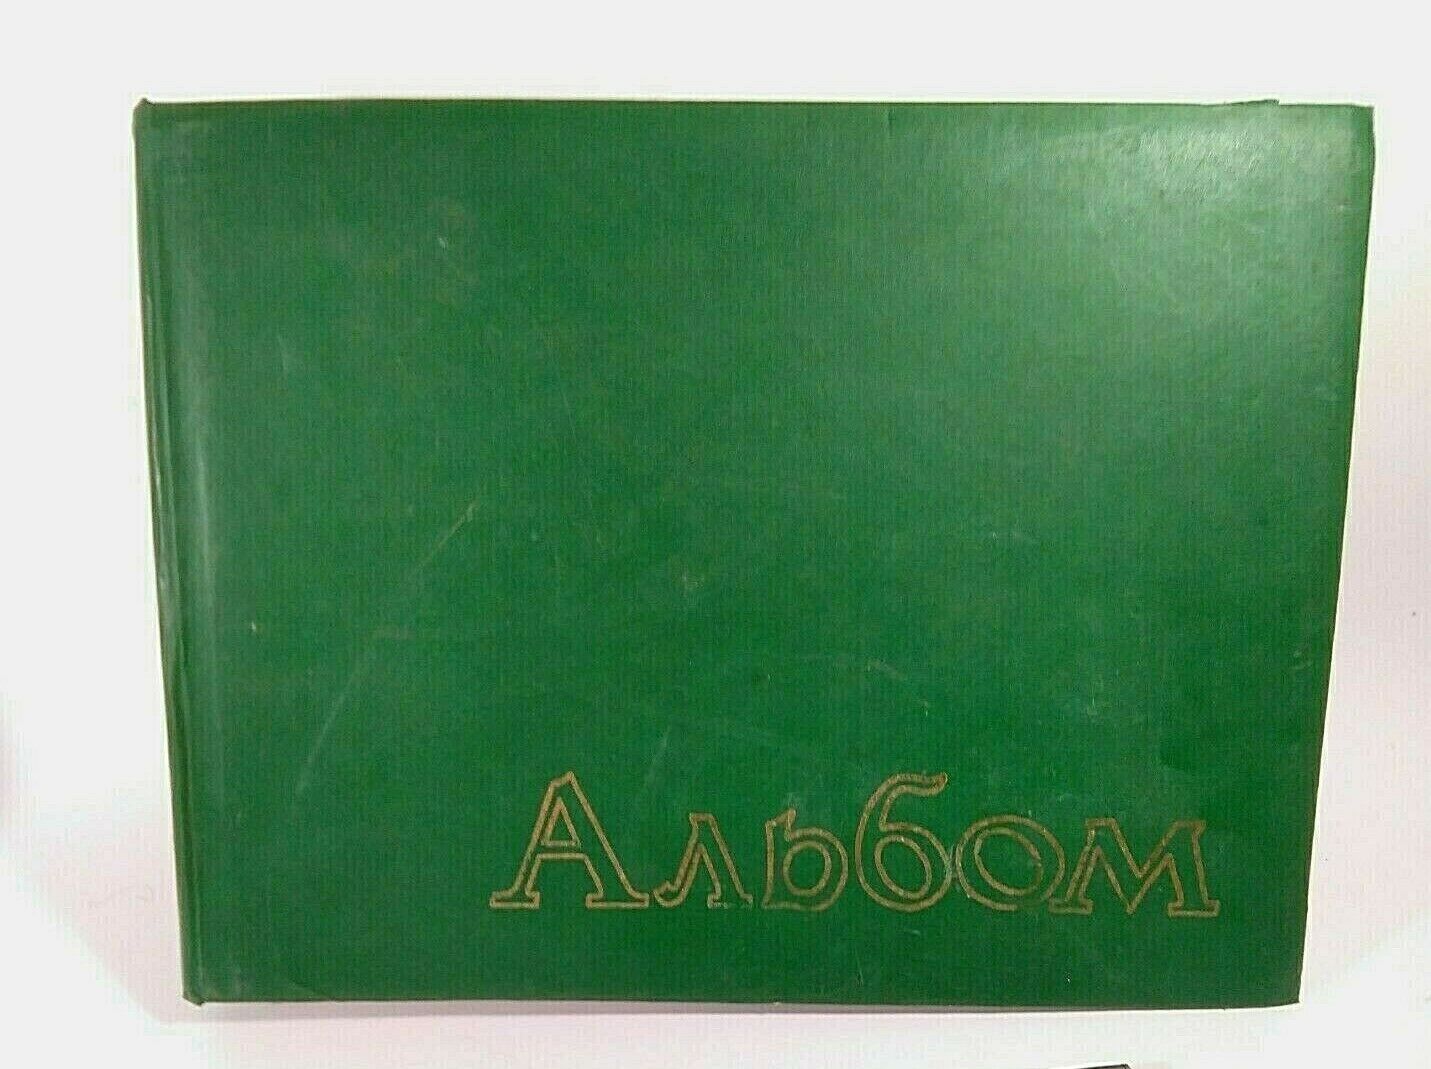 Rare Soviet homemade album about participation in the Second World War